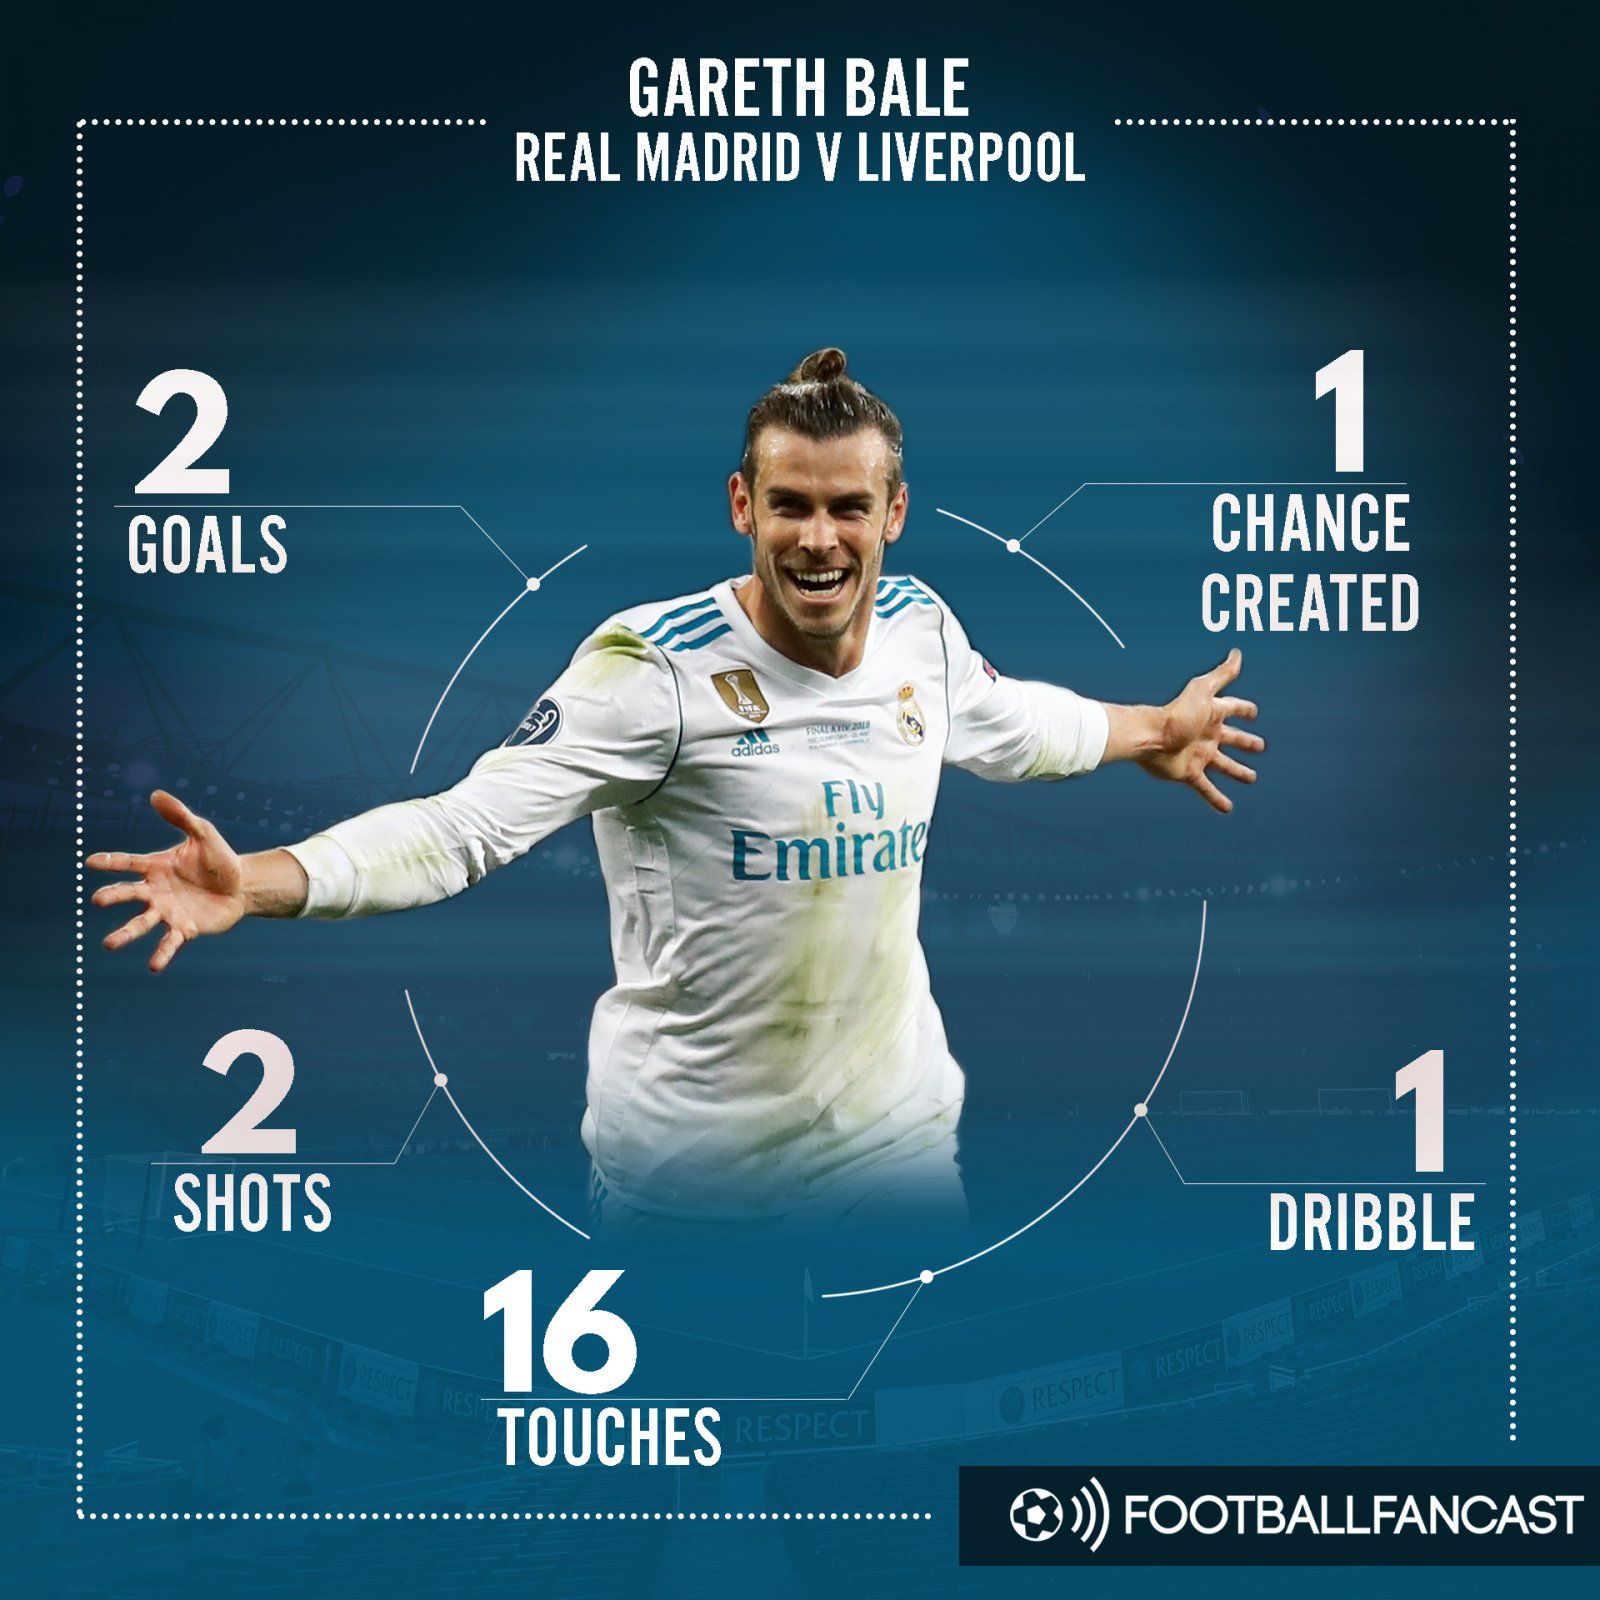 Gareth Bale's stats from the Champions League final